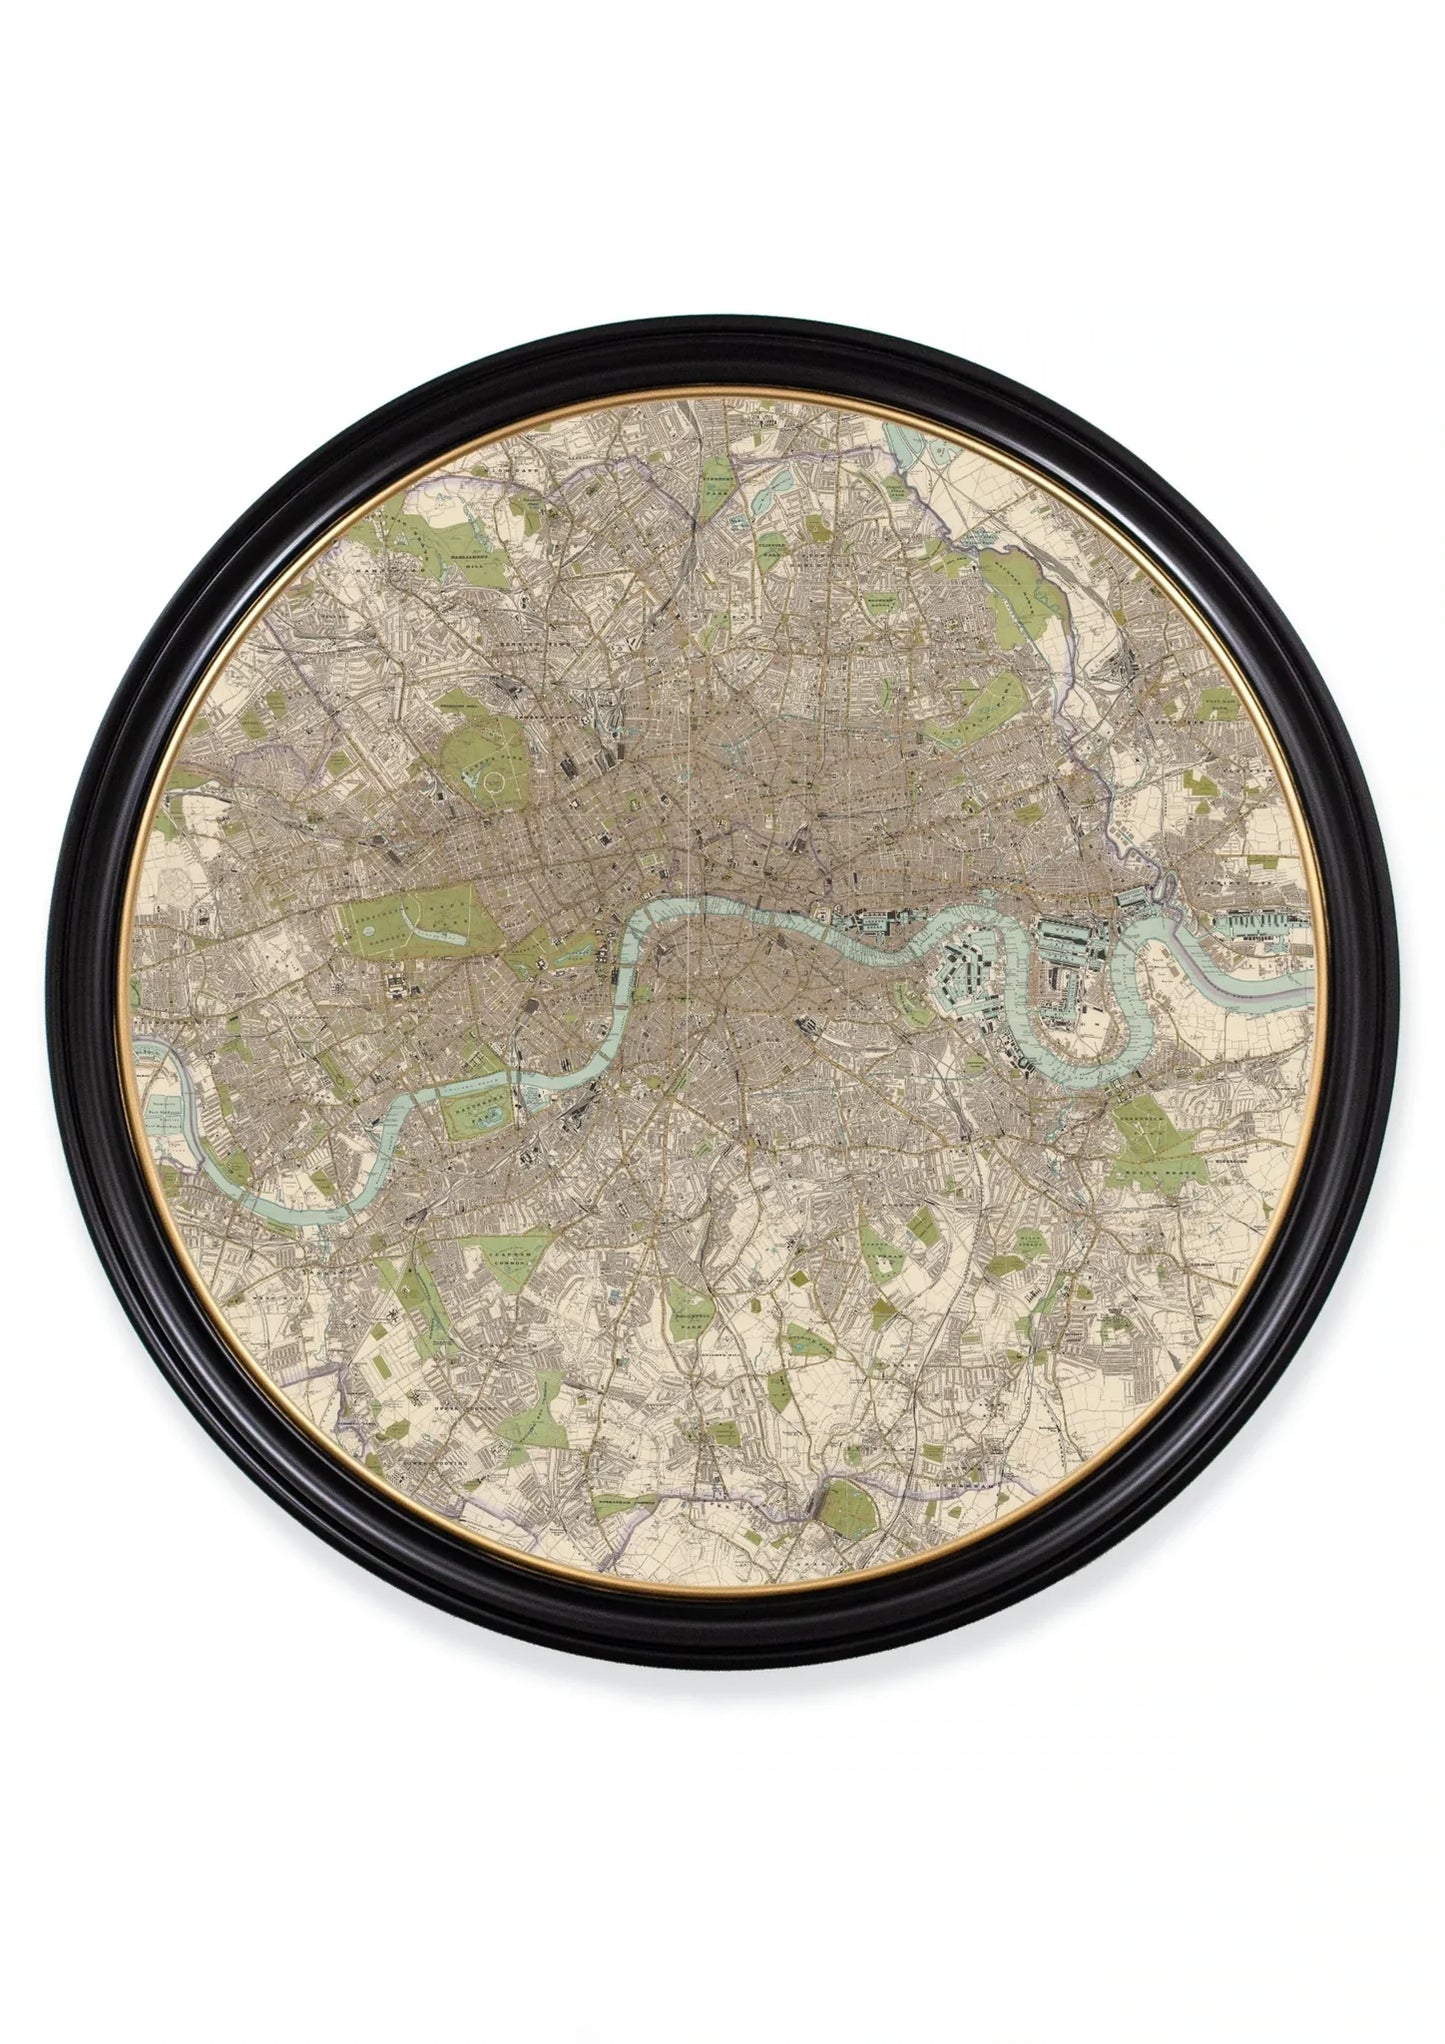 C.1905 Map of London - Round Frame for sale - Woodcock and Cavendish